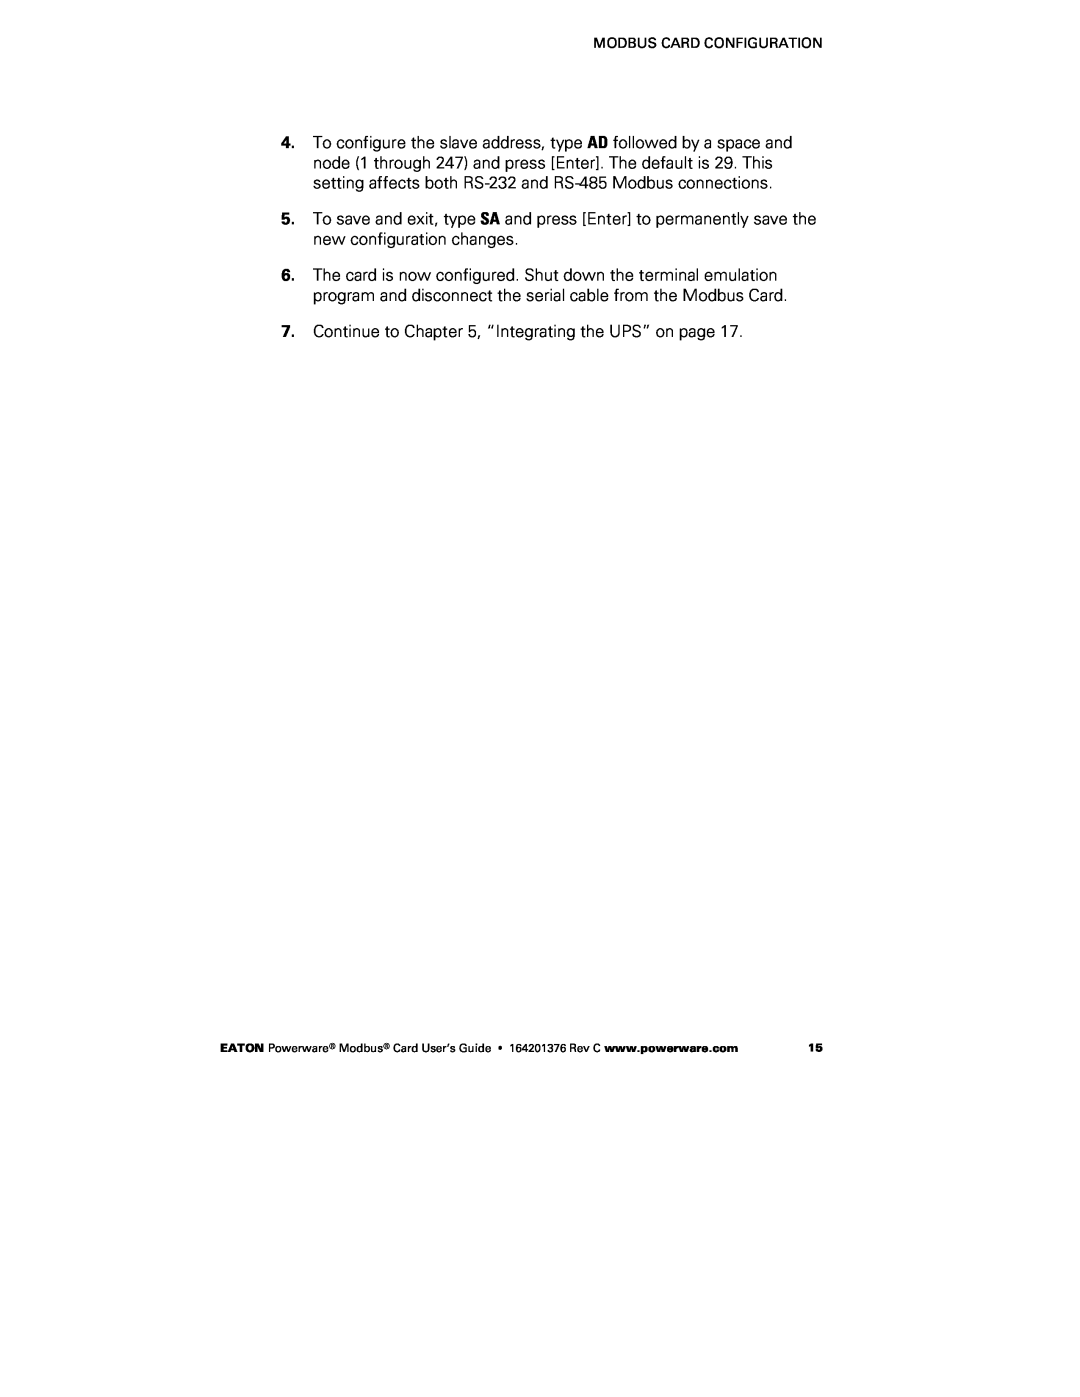 Powerware FCC 15 manual Continue to , “Integrating the UPS” on page 